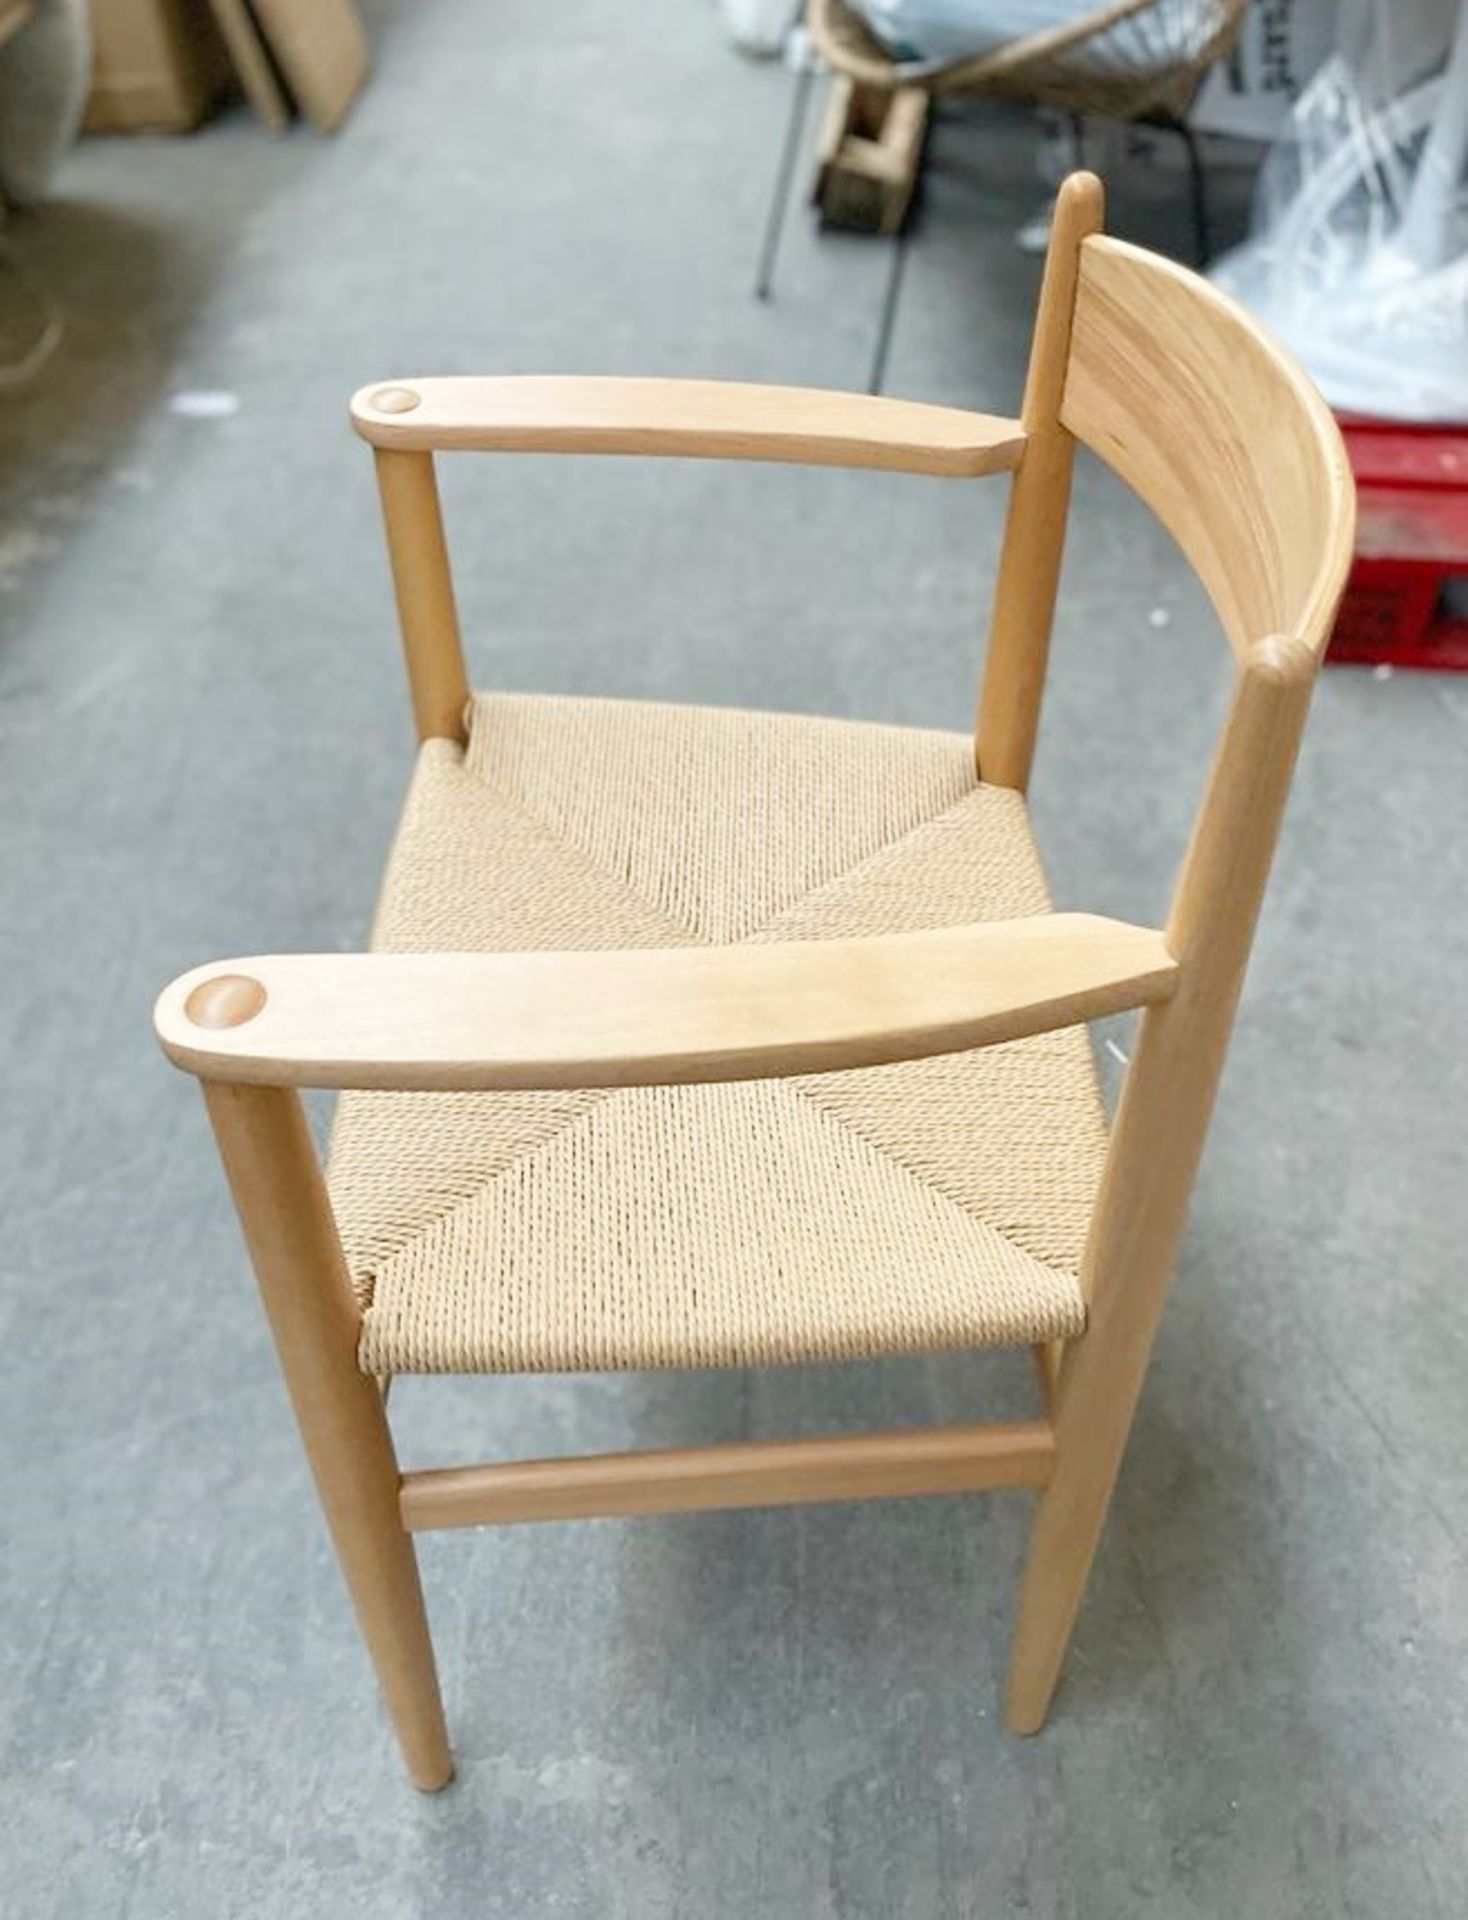 4 x Nielsen Natural + Natural Cord Chair With Arm Rests - Dimensions: 50(h) x 48(d) x 58(w) cm - - Image 7 of 8